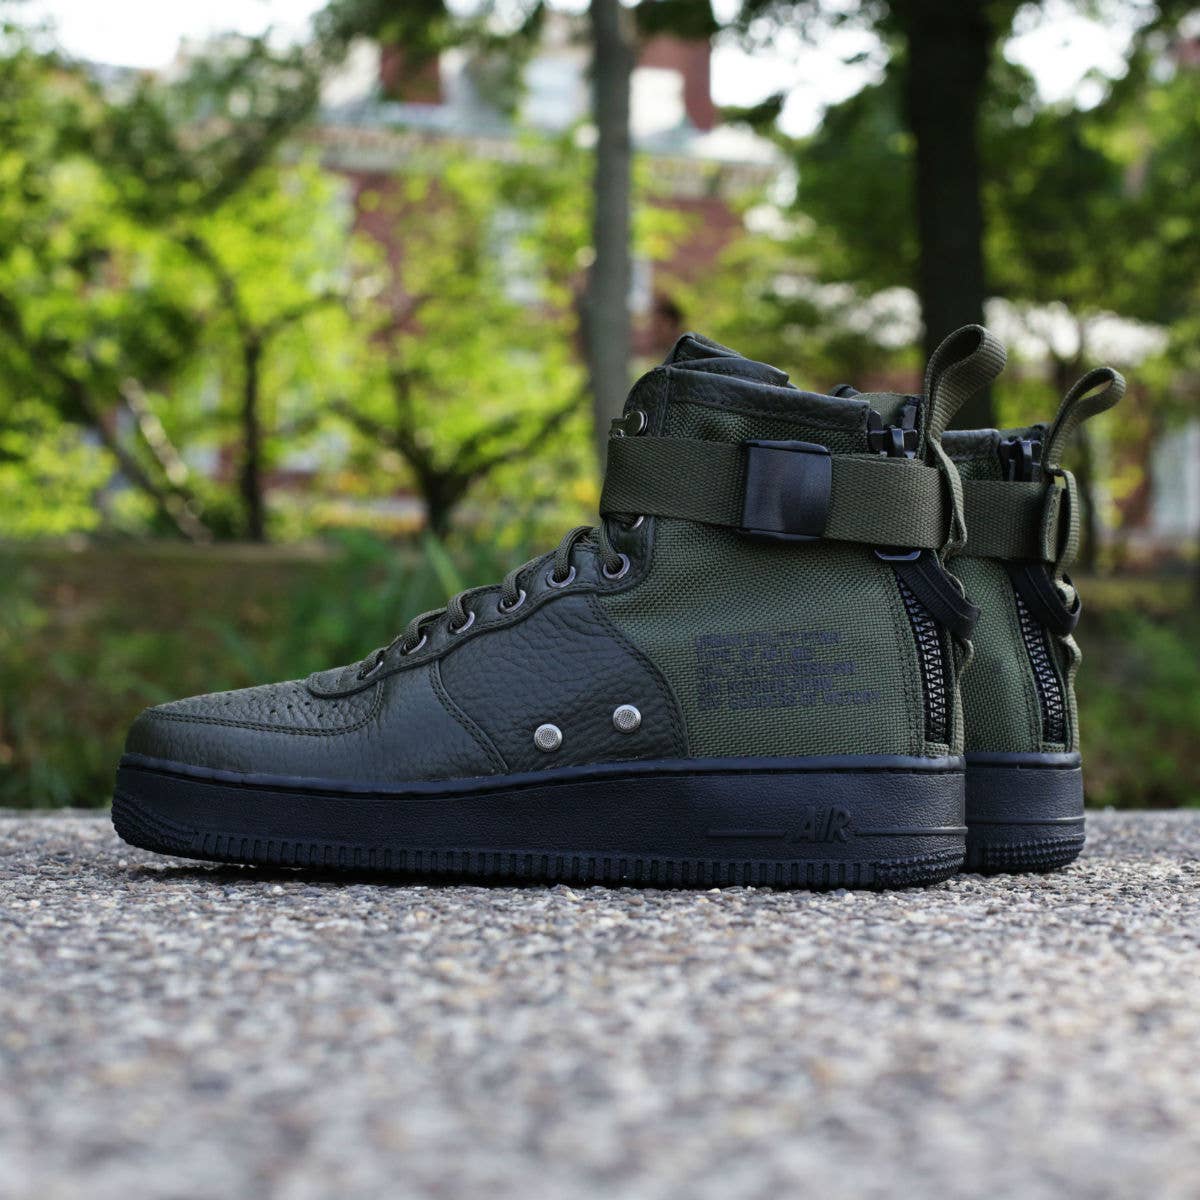 Nike SF Air Force 1 Mid Sequoia Release Date Profile 917753 300